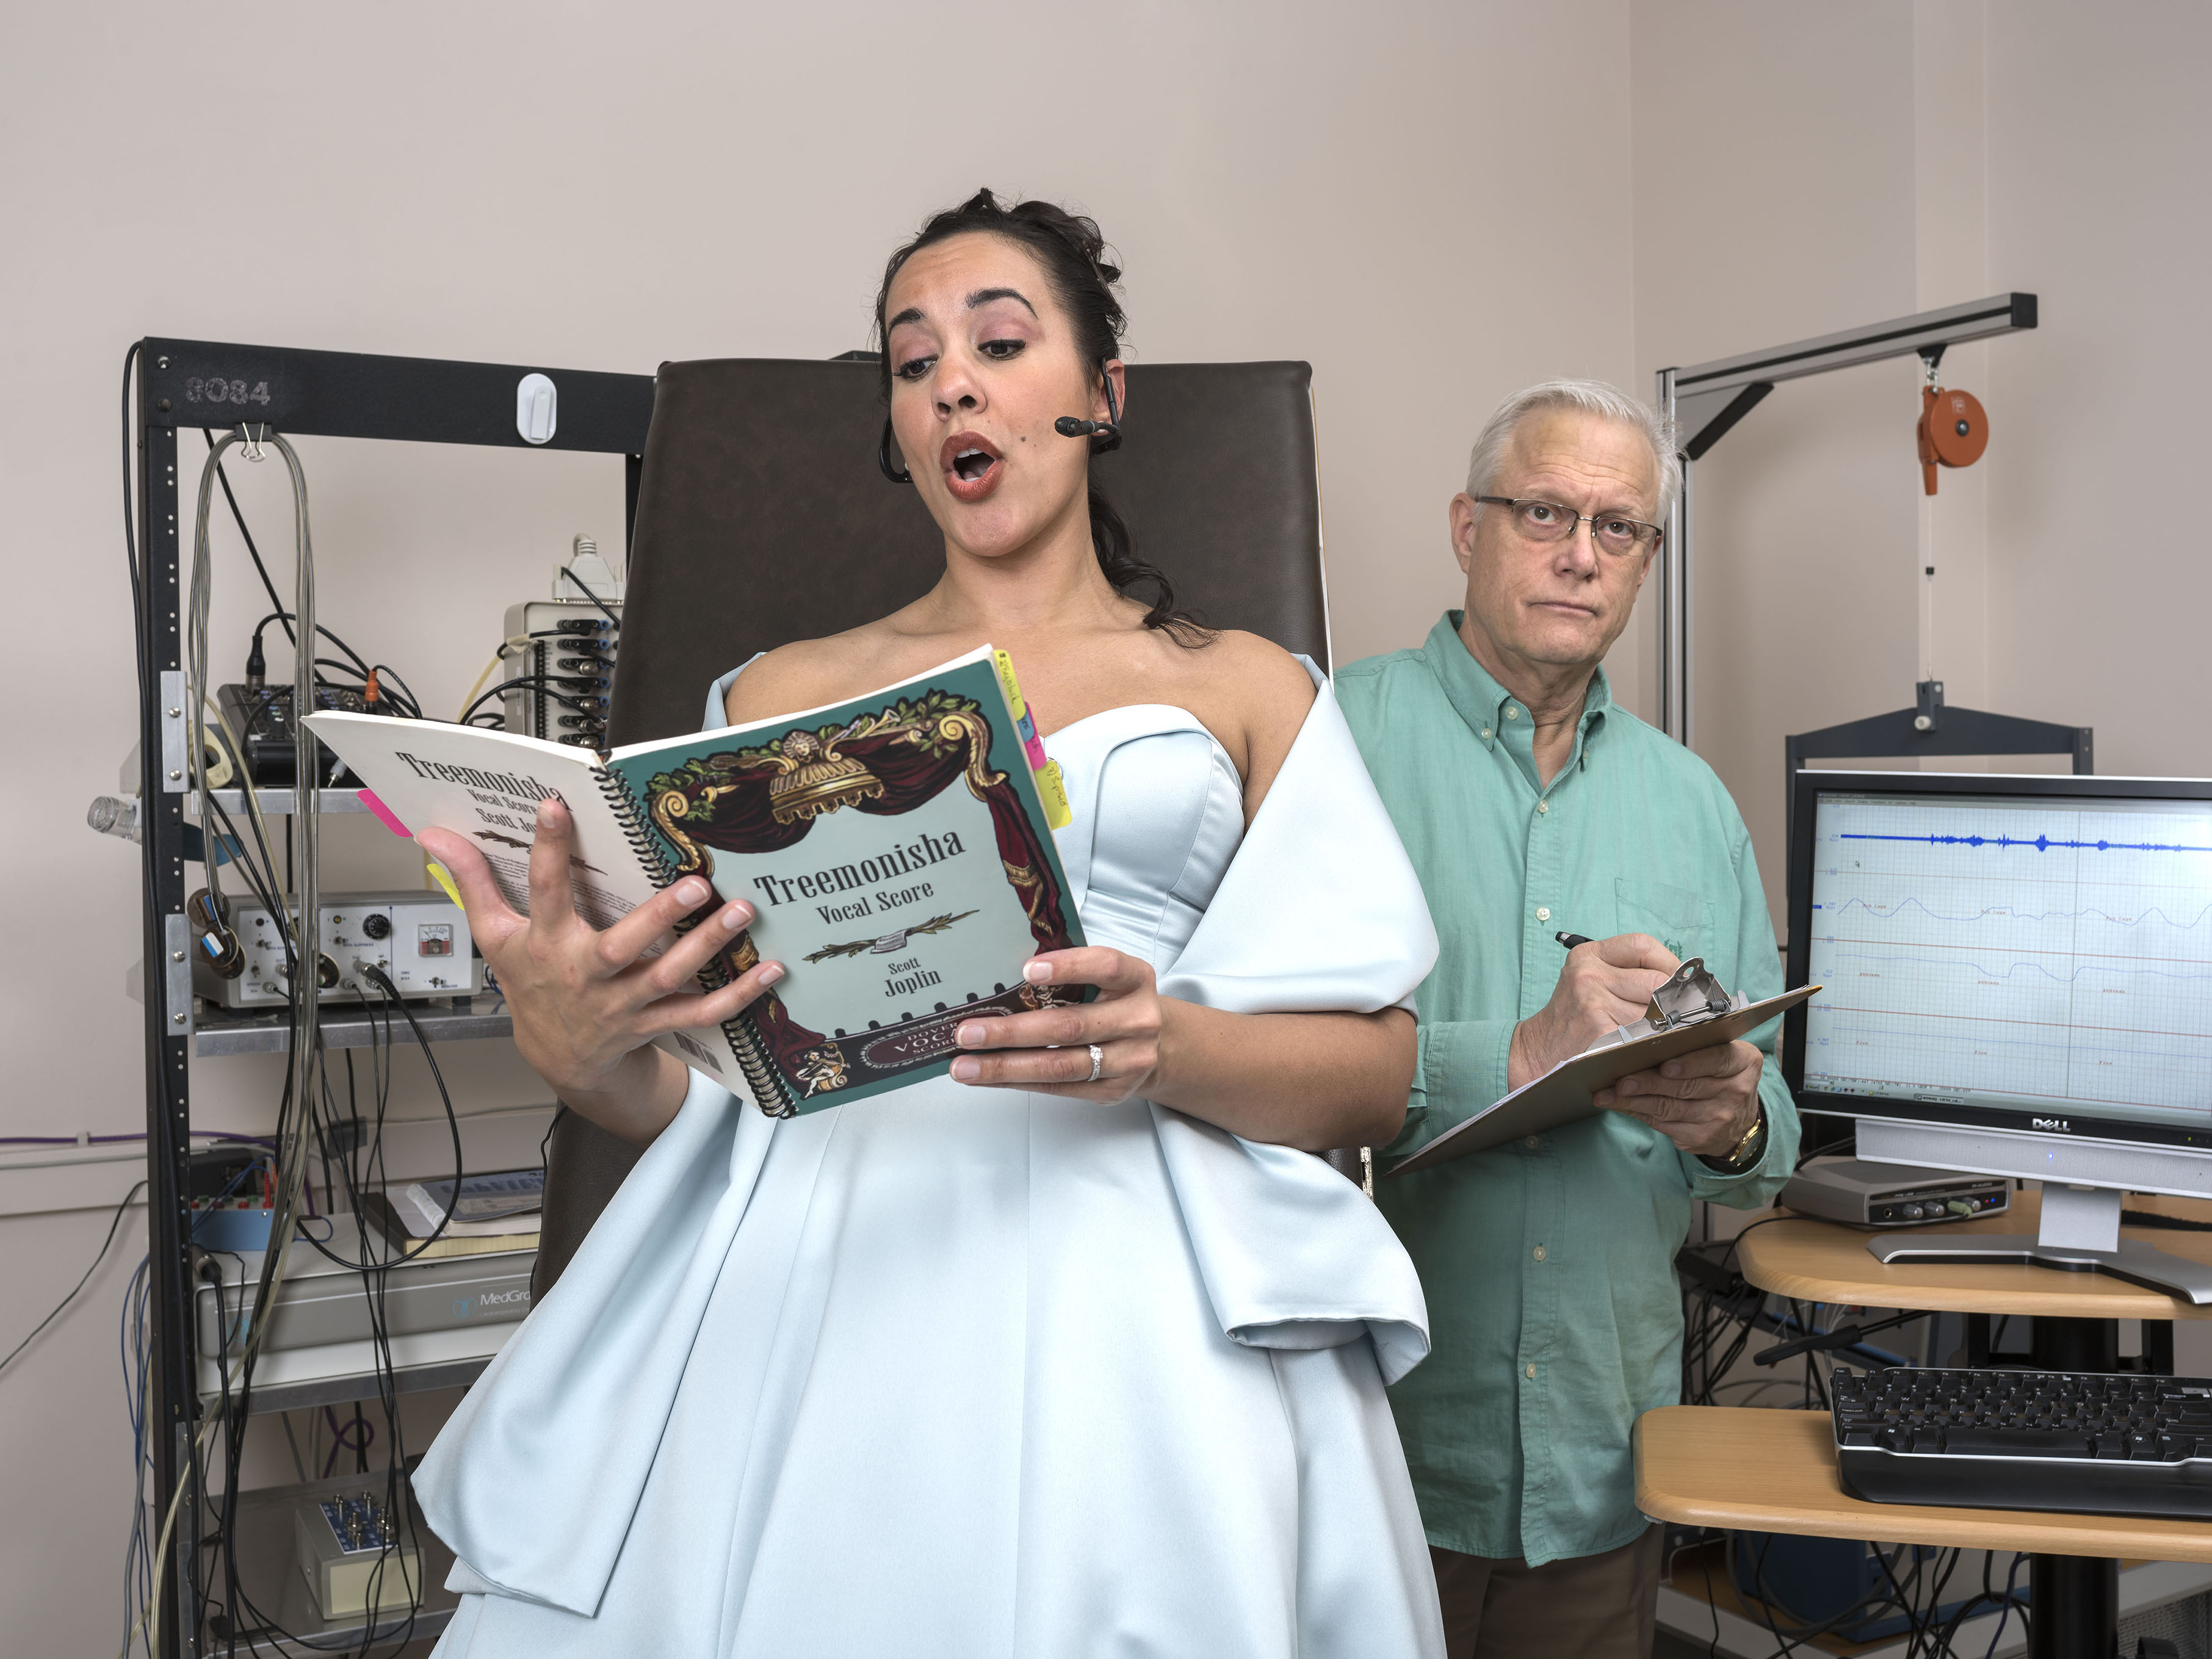 A woman is singing opera as a Dr. watches taking notes in a research lab.